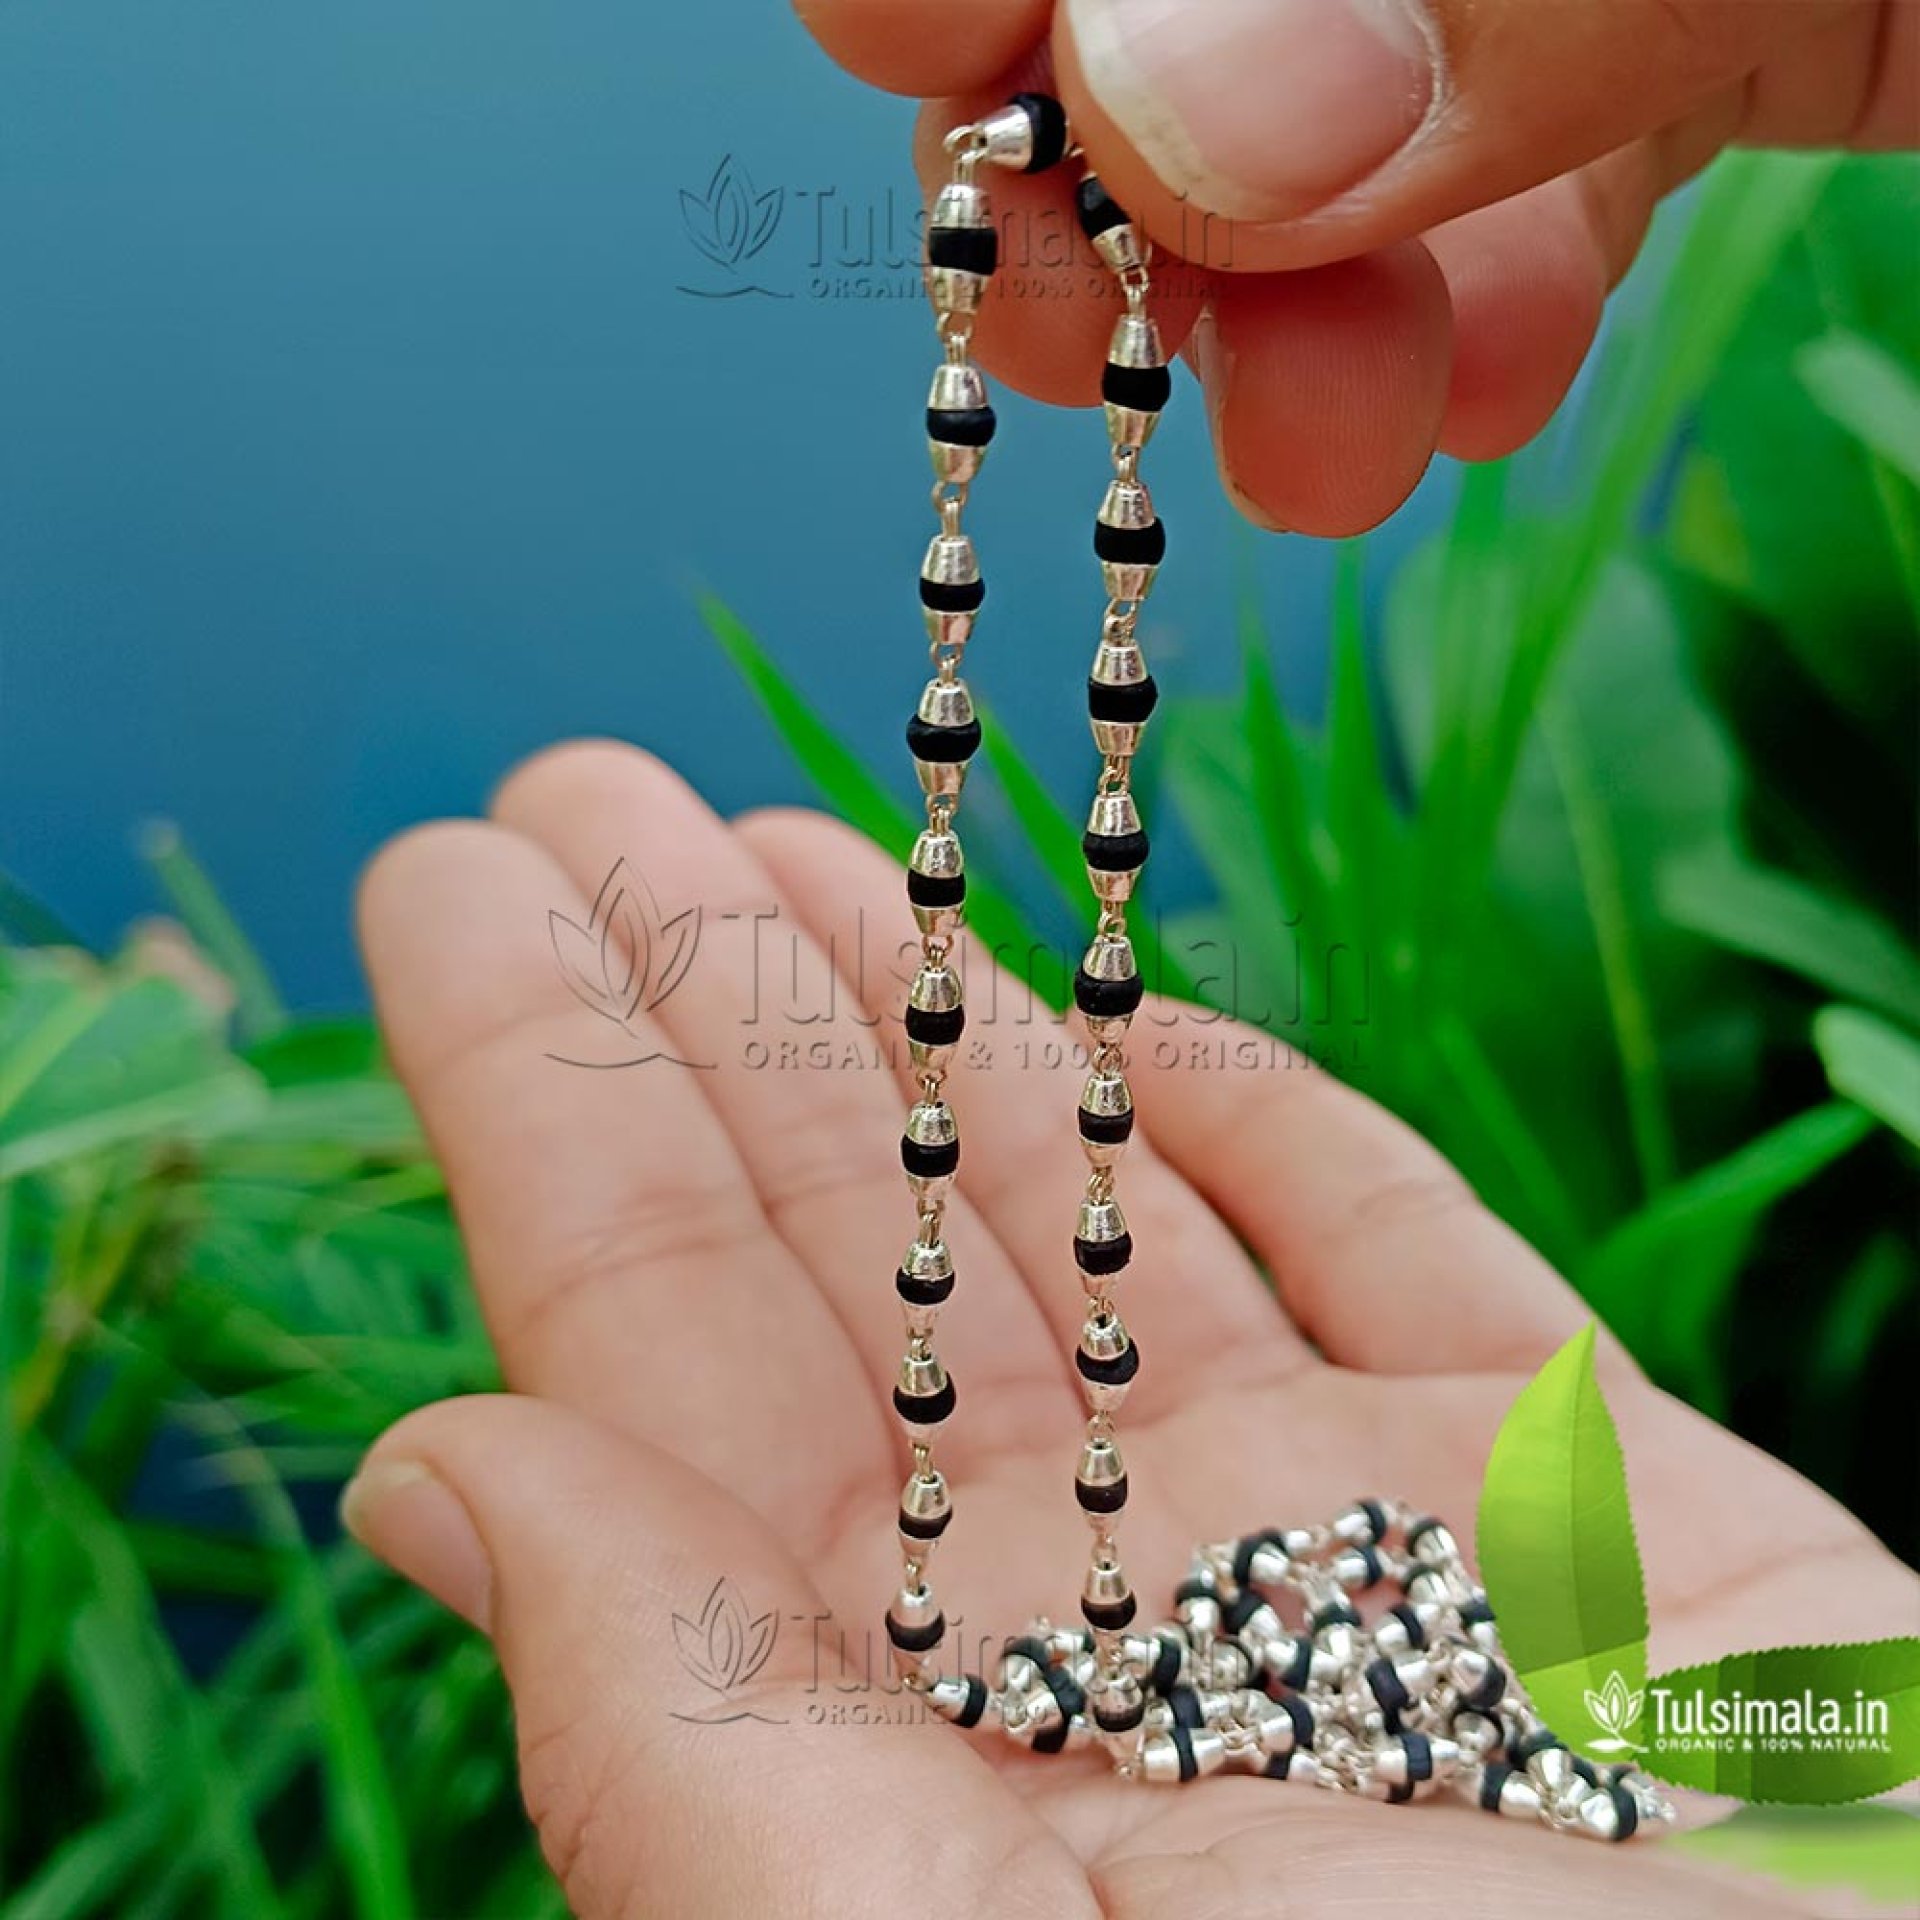 Know Rules Before Wearing Tulsi Mala | Times of India